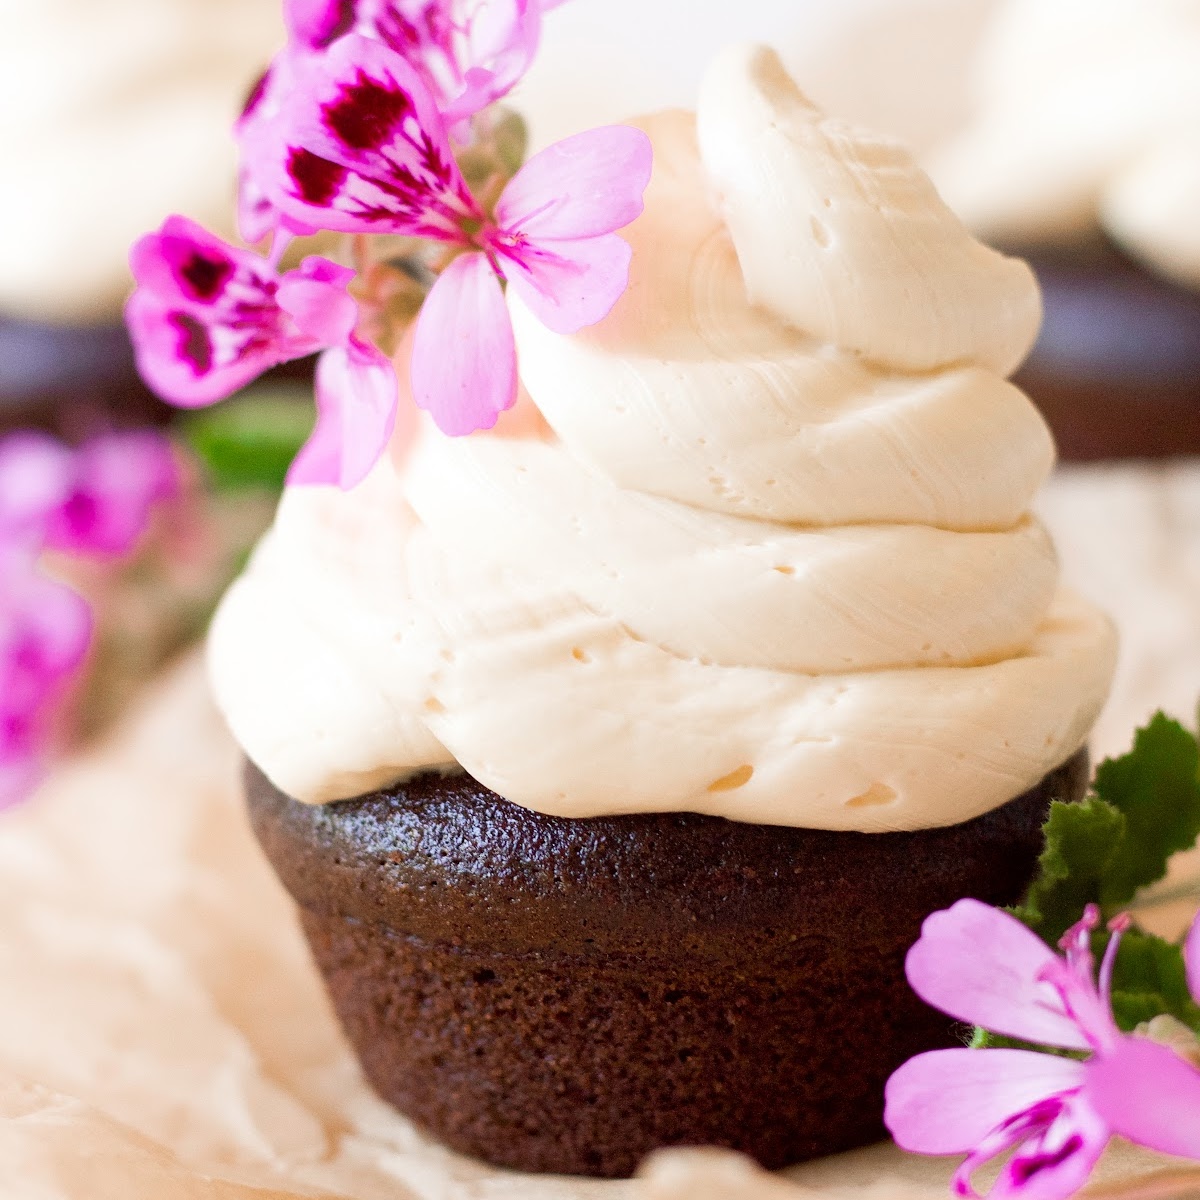 Chocolate cupcake topped with a 2-inch swirl of vanilla buttercream frosting and pink geranium flowers for garnish.